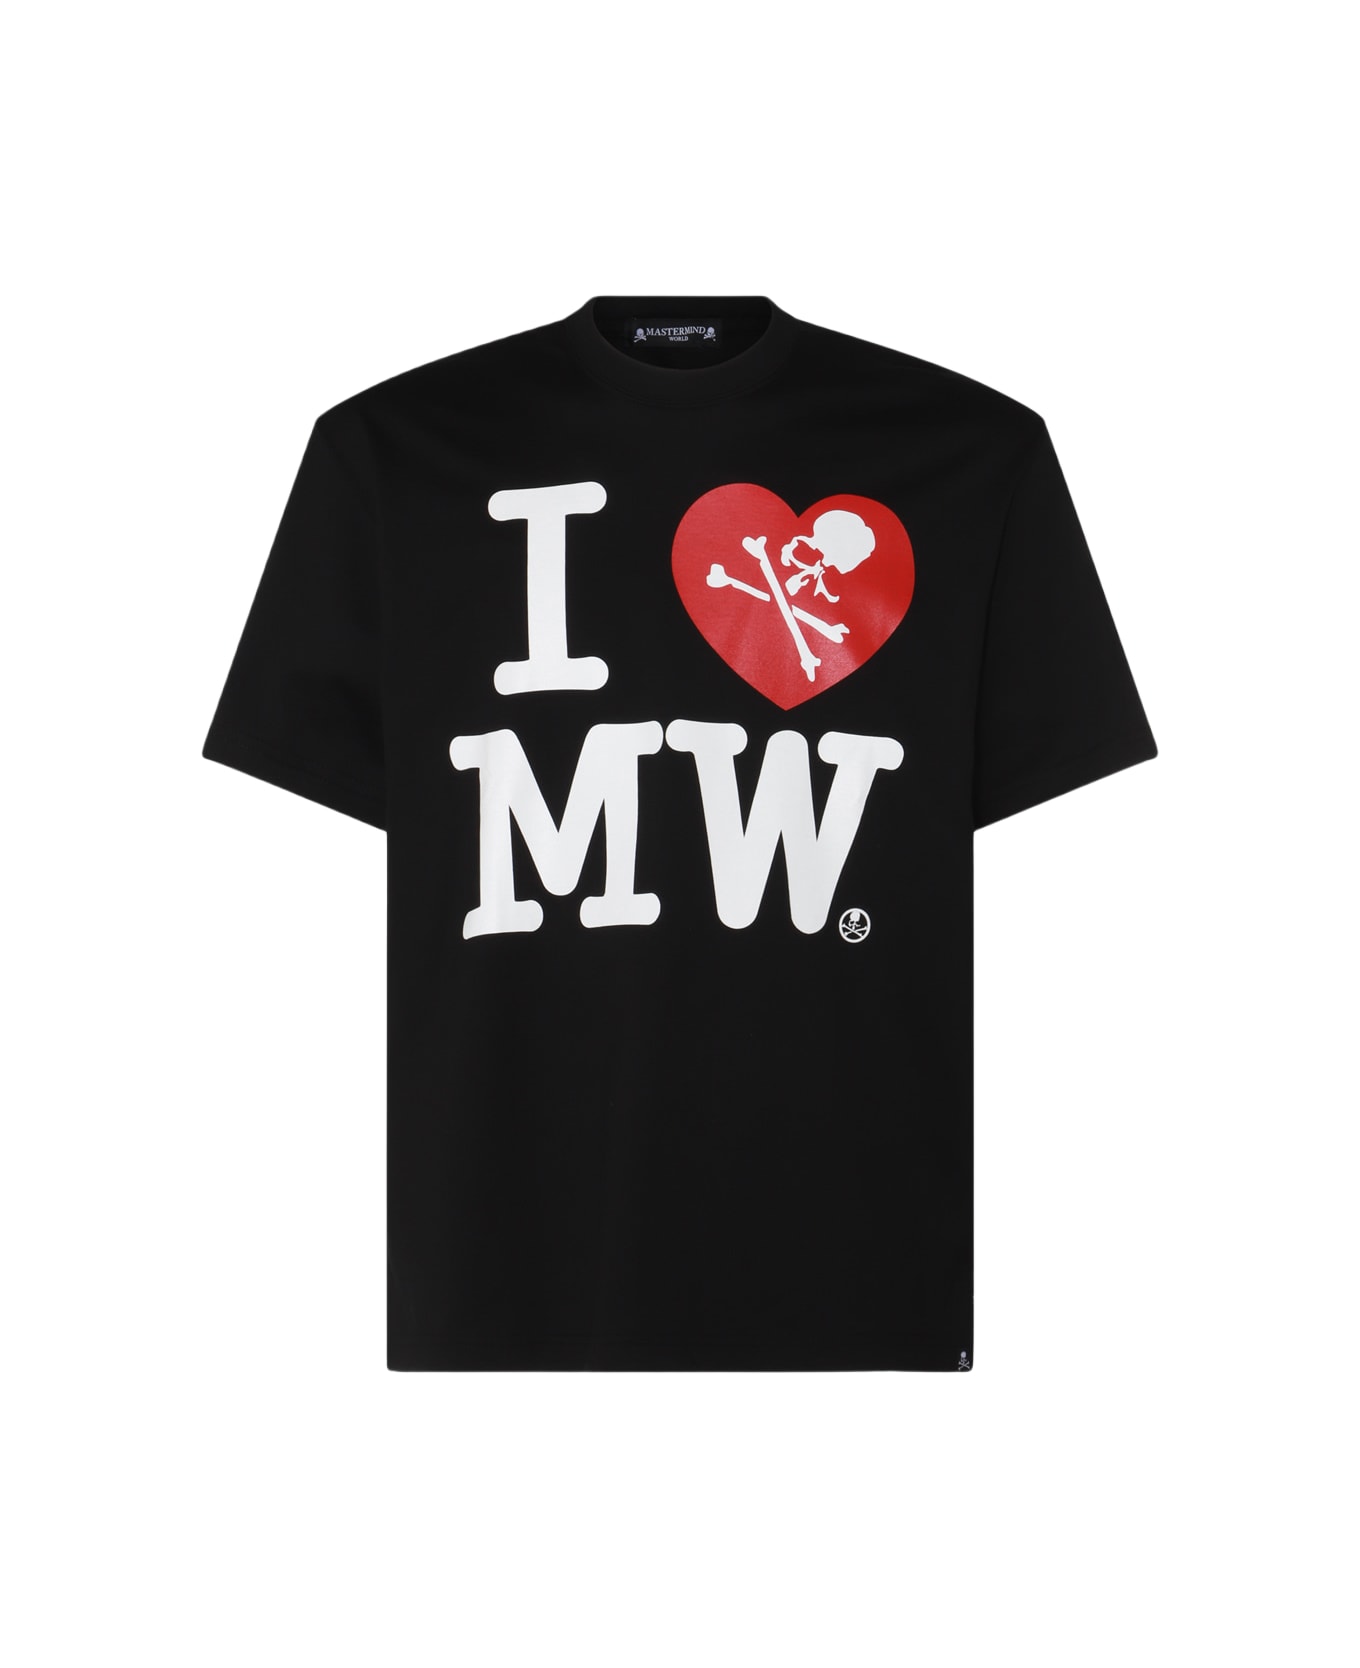 MASTERMIND WORLD Black, Red And White Cotton T-shirt - Black シャツ